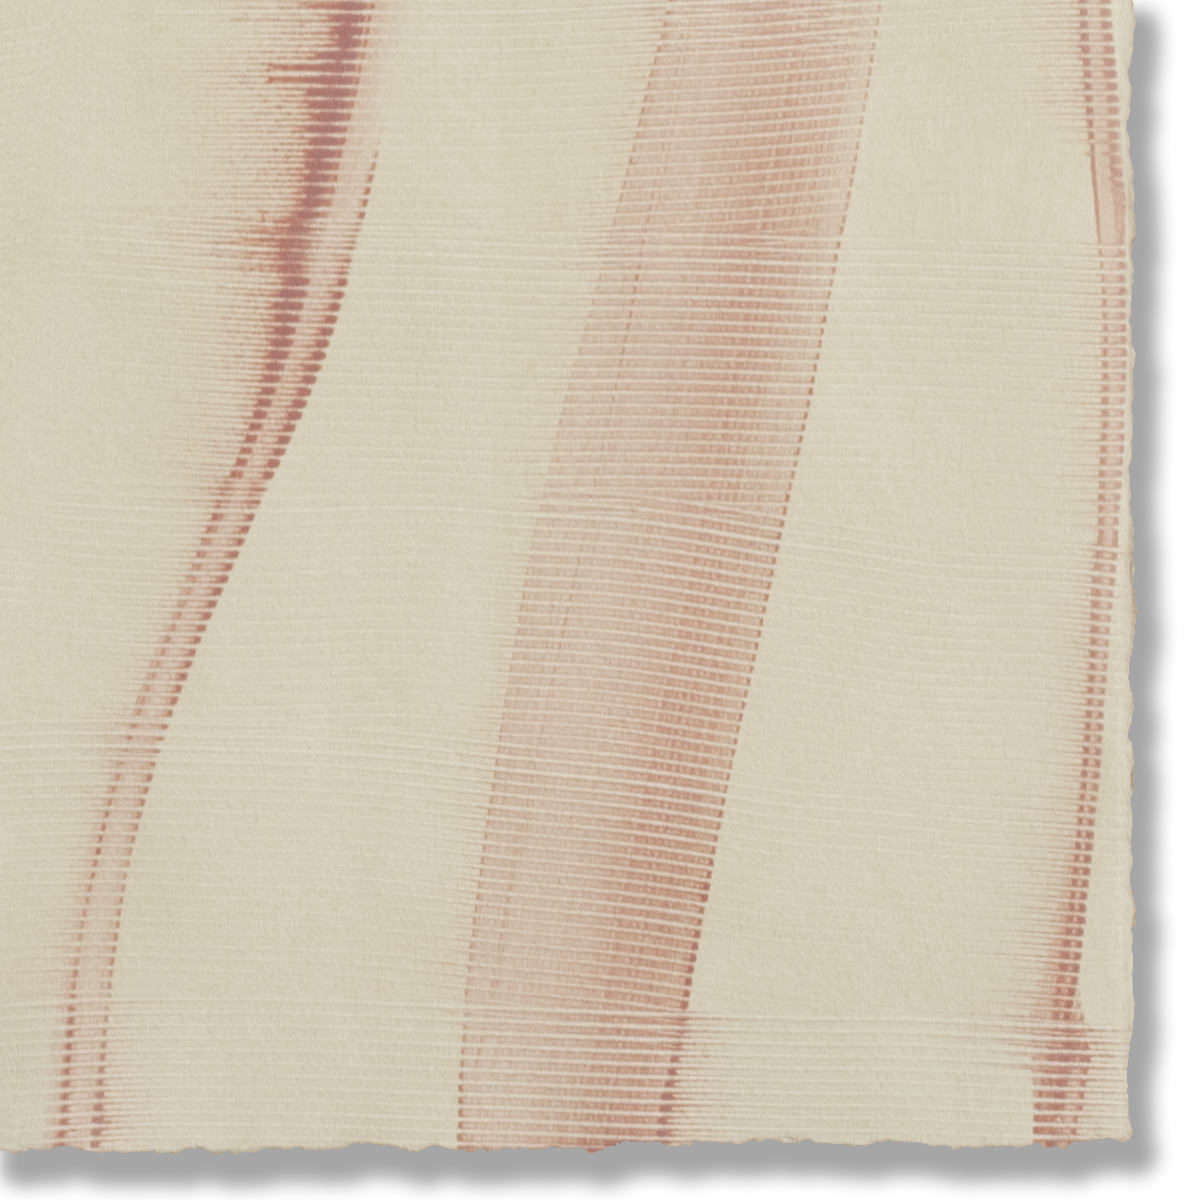 Detail of a handmade wallpaper swatch with an irregular combed stripe pattern in pink on a tan field.